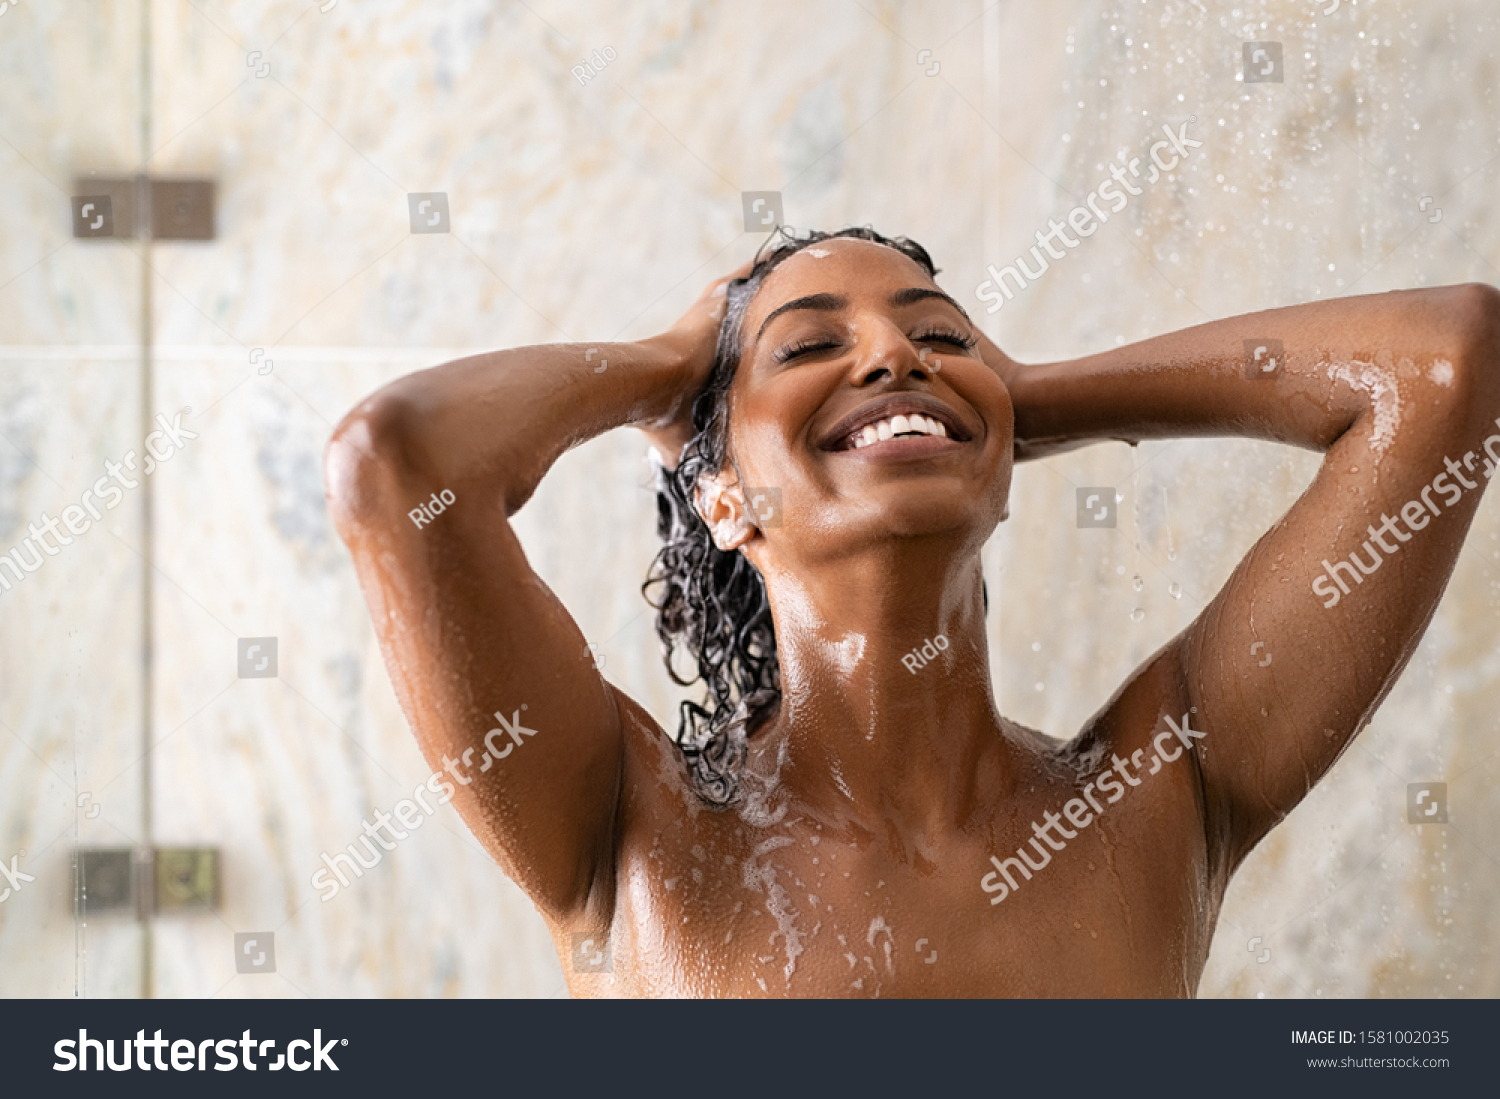 Young Woman Washing Hair In Shower At Luxury Spa Royalty Free Stock